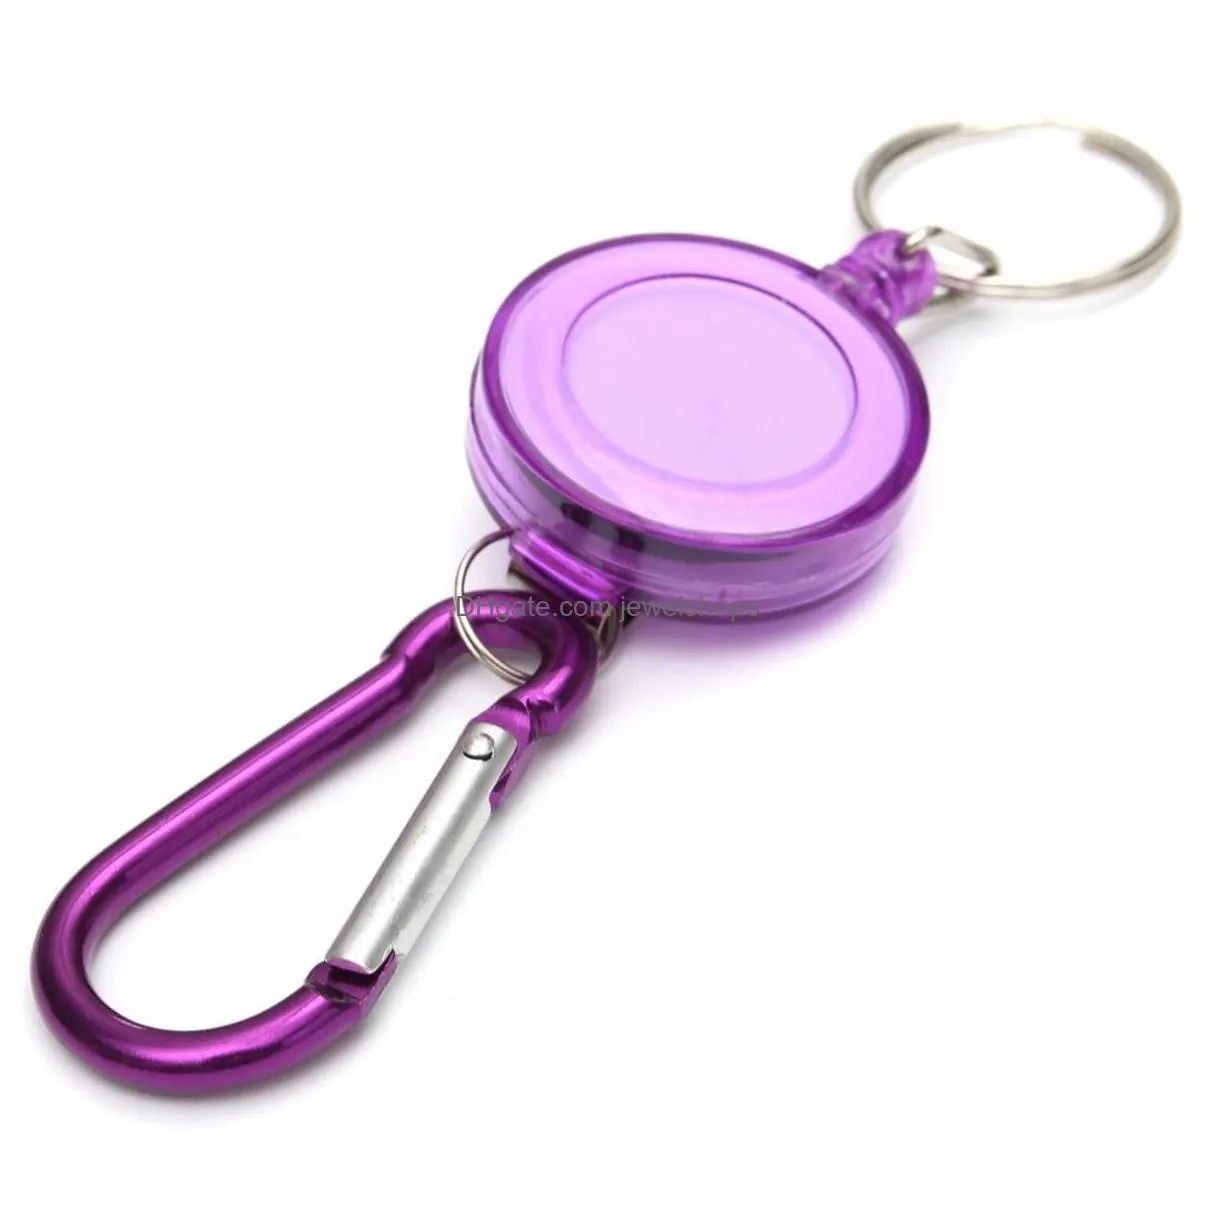 Key Rings Fishing Rope Tape Measure Tool Keychain Portable Fly River Stream Retractable Reel Badge Boat Carabiner Clip Key Ring Drop D Dhz98